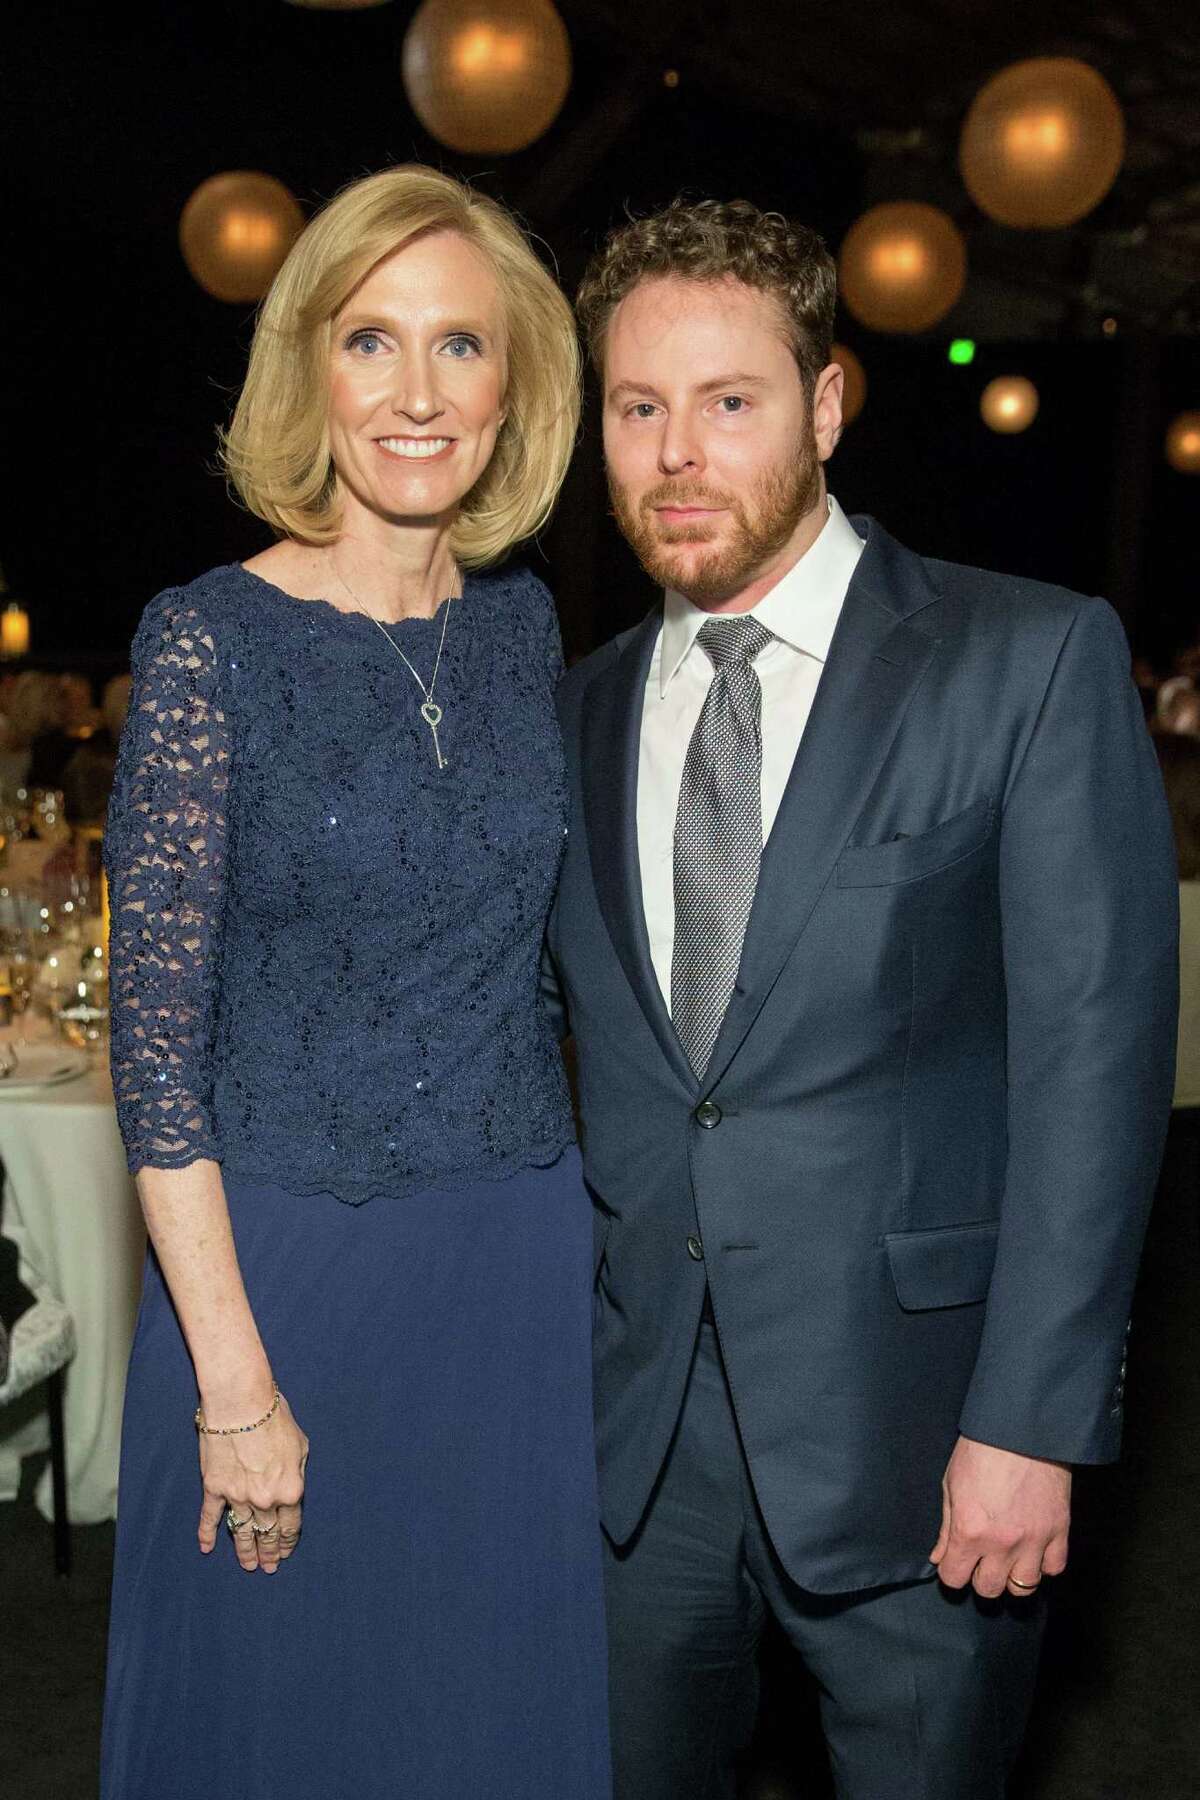 The CPMC 2020 Gala sponsored by CHANEL was held at Pier 35 on February 24. It raised $2.5 million for Sutter Health's CPMC and Clinical trials for food allergies at CPMC. Shown are Kari Nadeau with Sean Parker, the honorary chair.